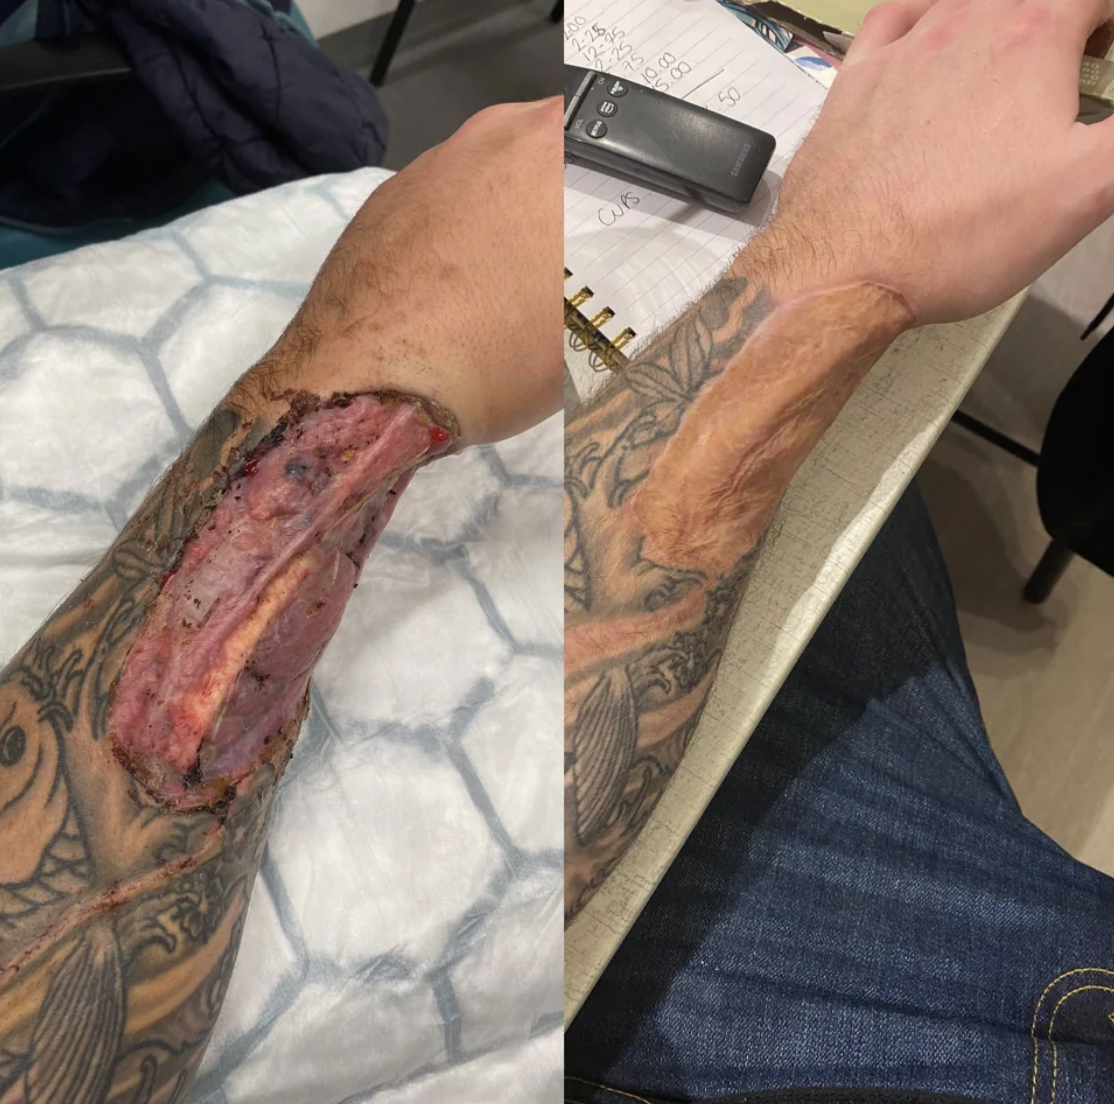 wound on arm, then healed wound on arm